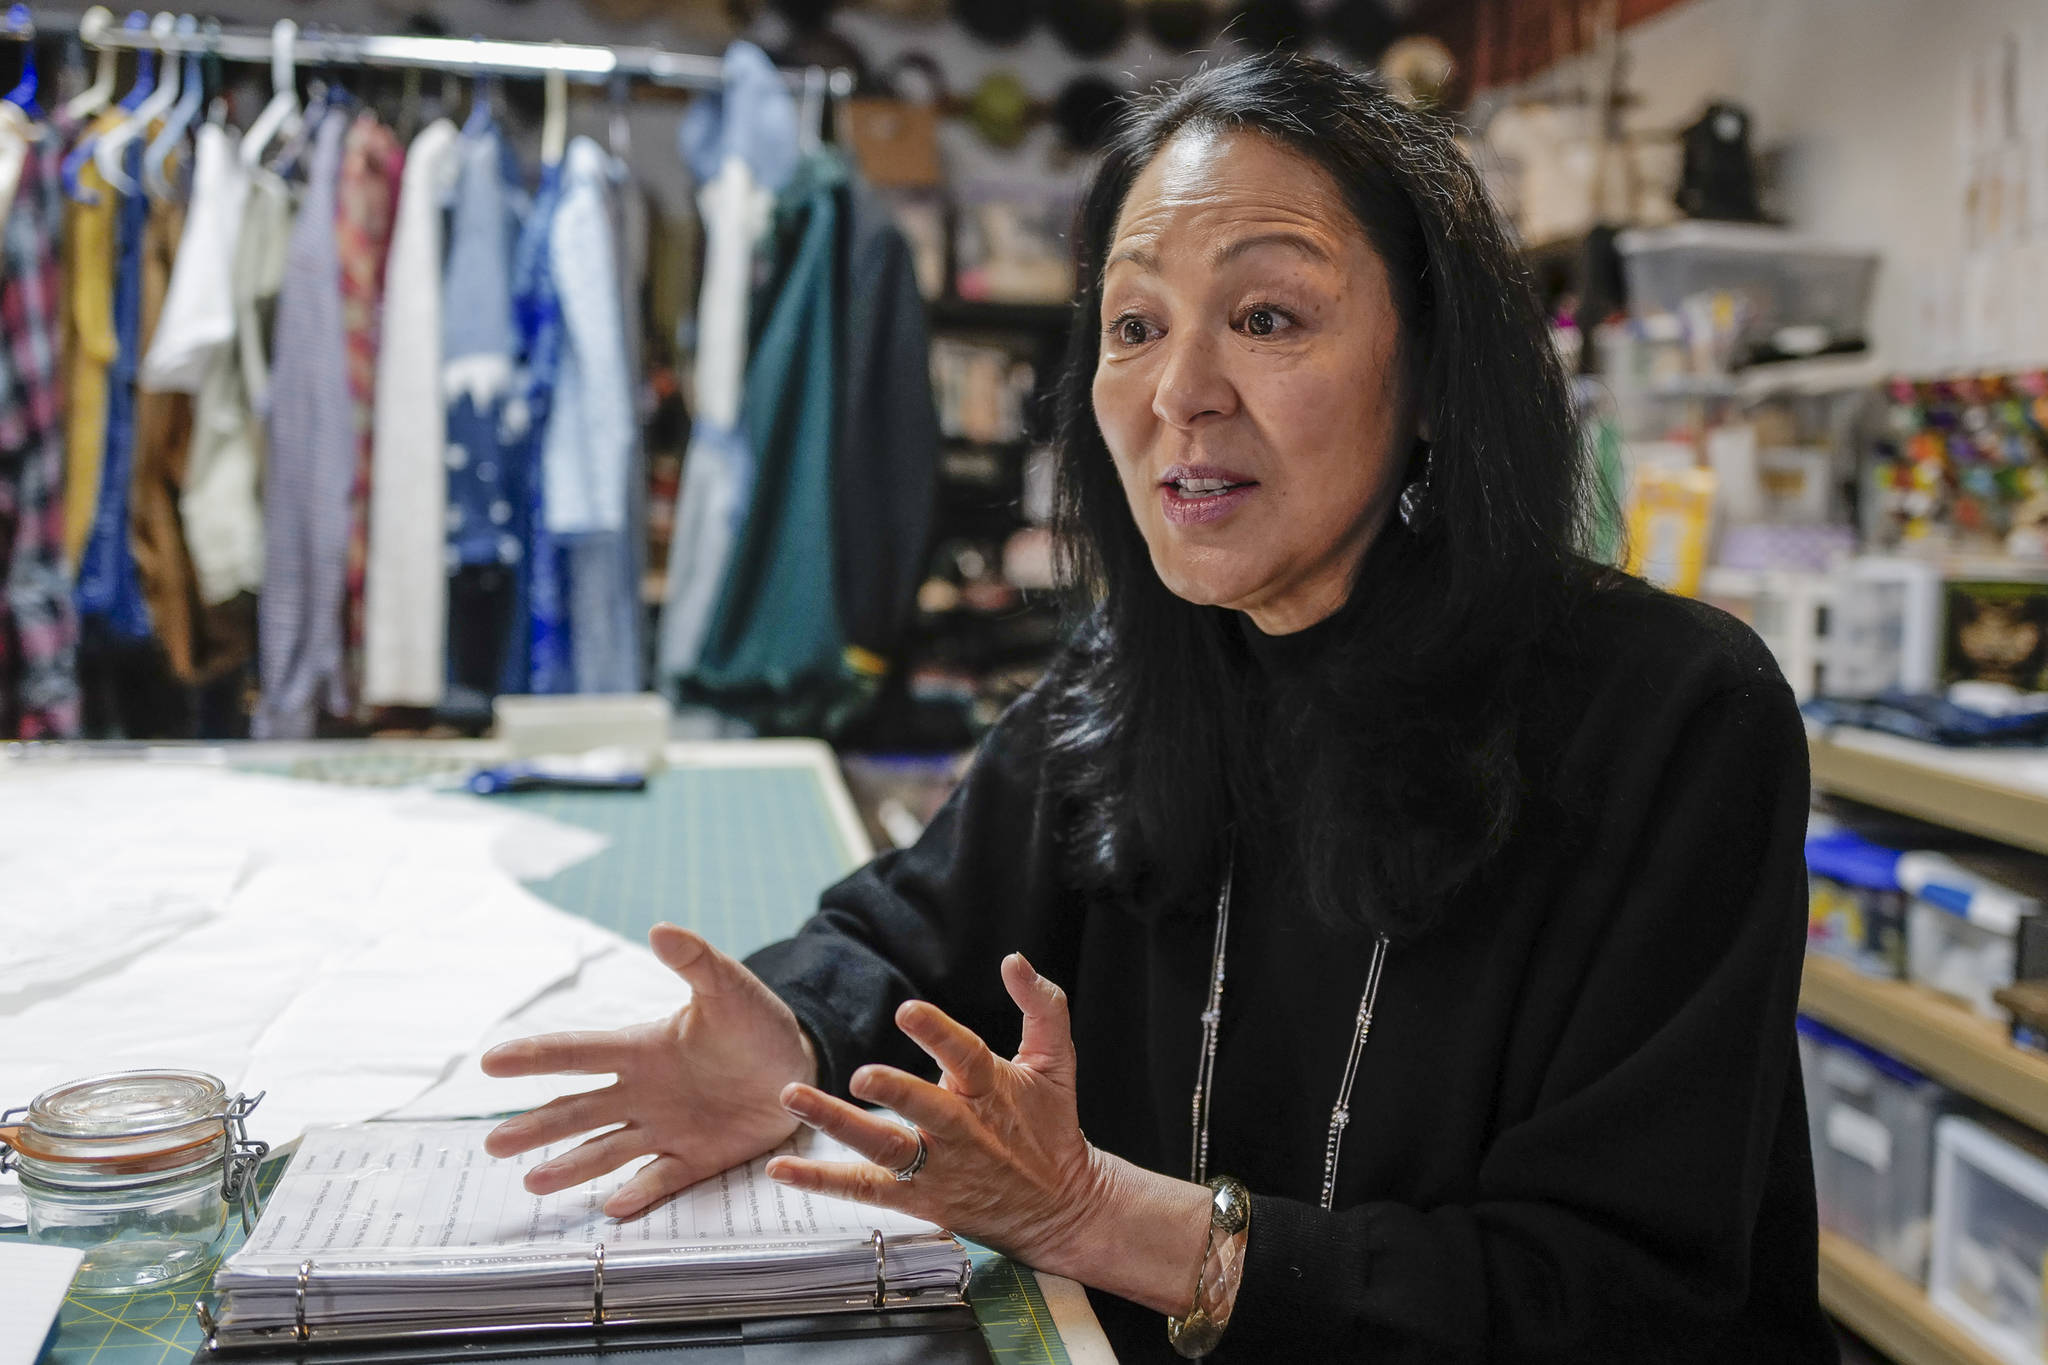 Leslie Ishii, the newly named Artistic Director for Perseverance Theatre, talks about her goals for Juneau’s professional theater during an interview on Wednesday, Oct. 30, 2019. (Michael Penn | Juneau Empire)